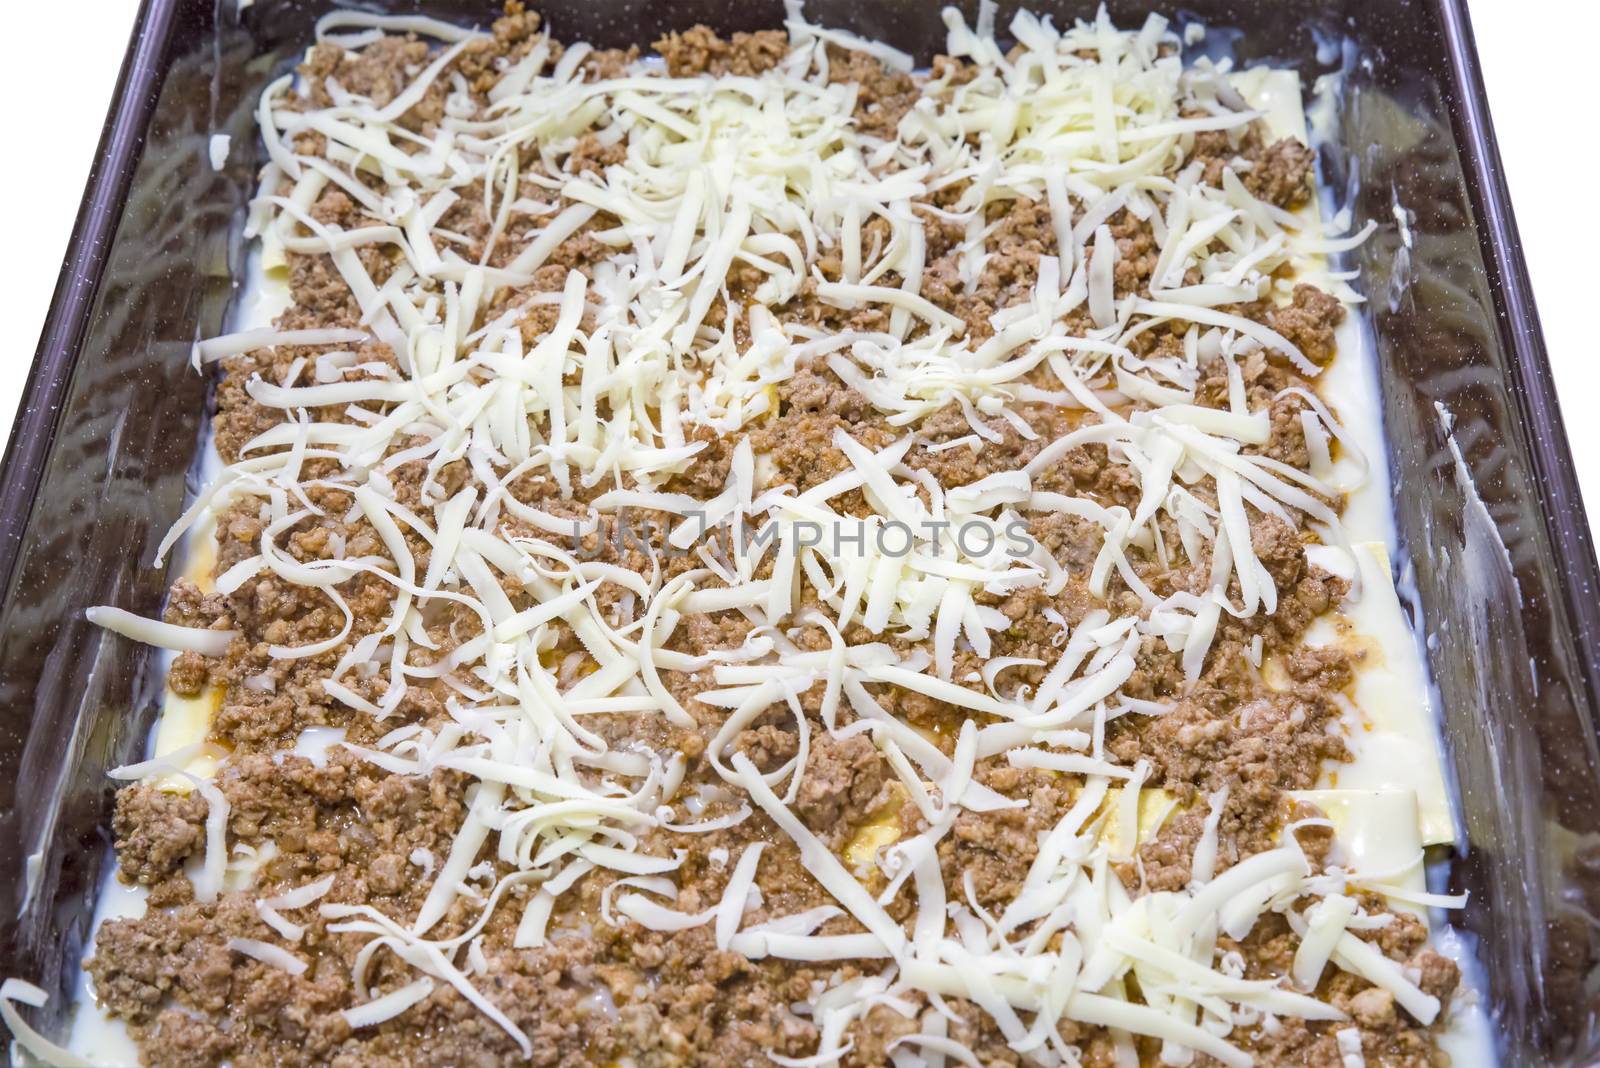 Tray with lasagna ready to be cooked by savcoco